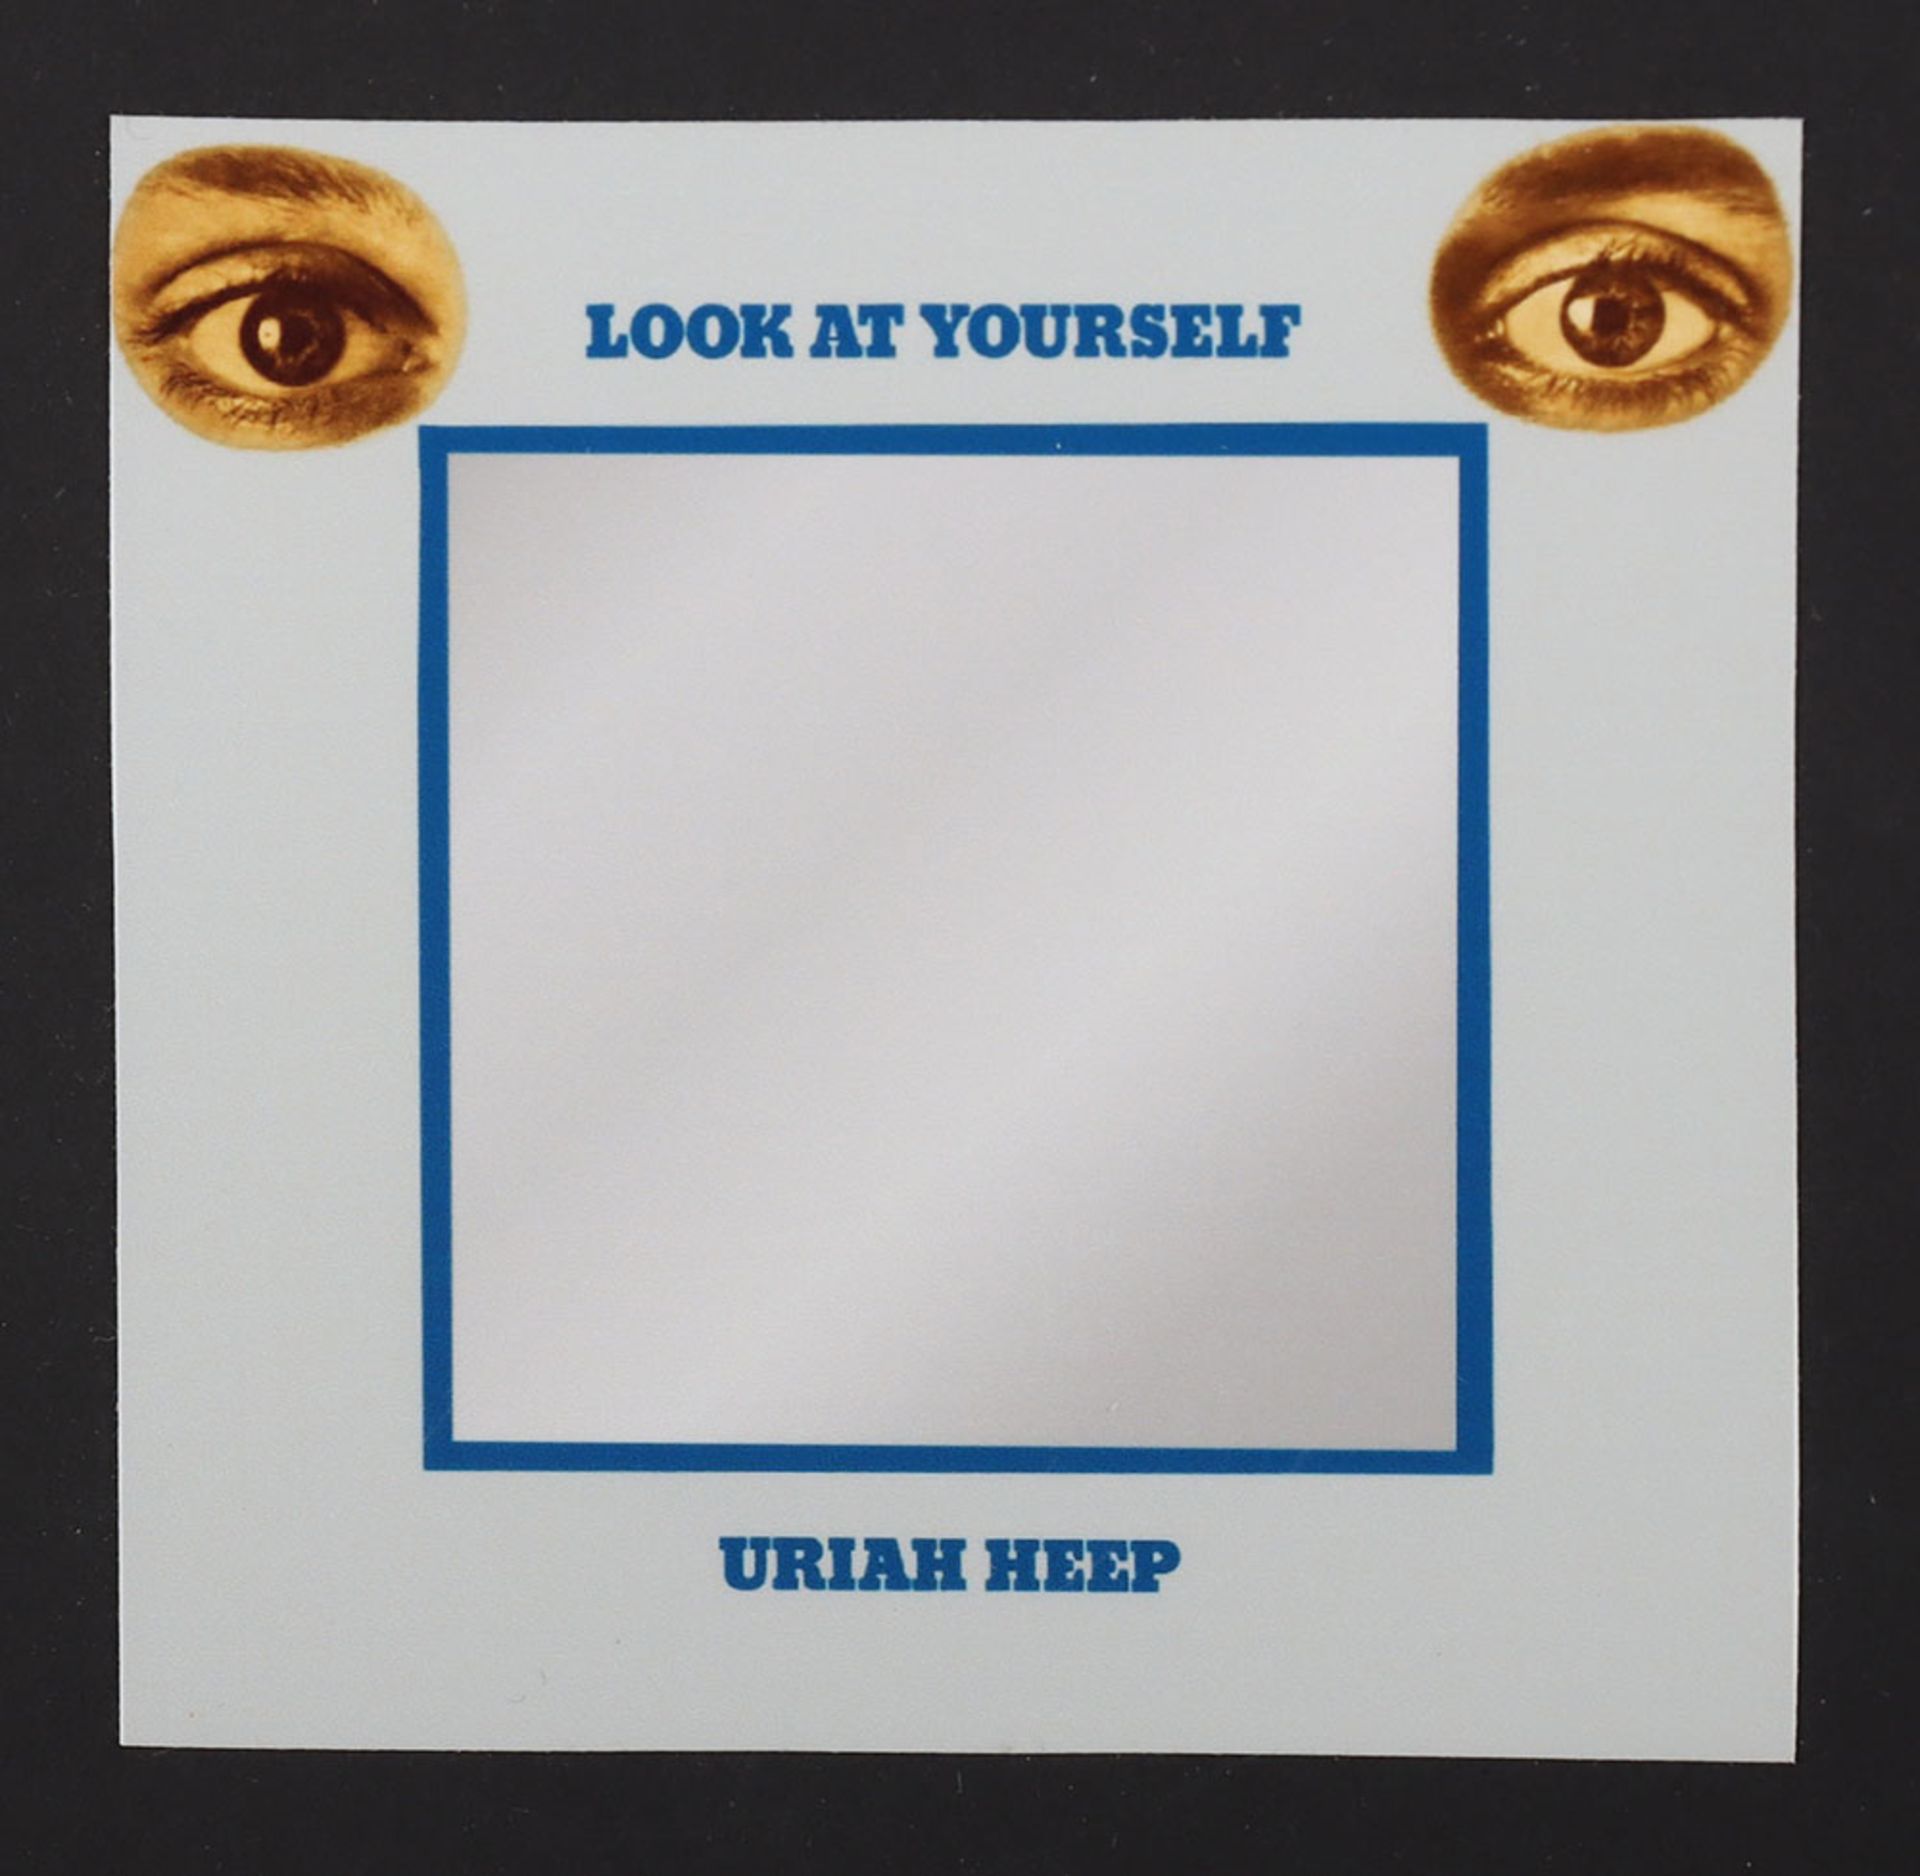 Uriah Heep Gold Disc Look After Yourself Limited Edition - Image 4 of 11